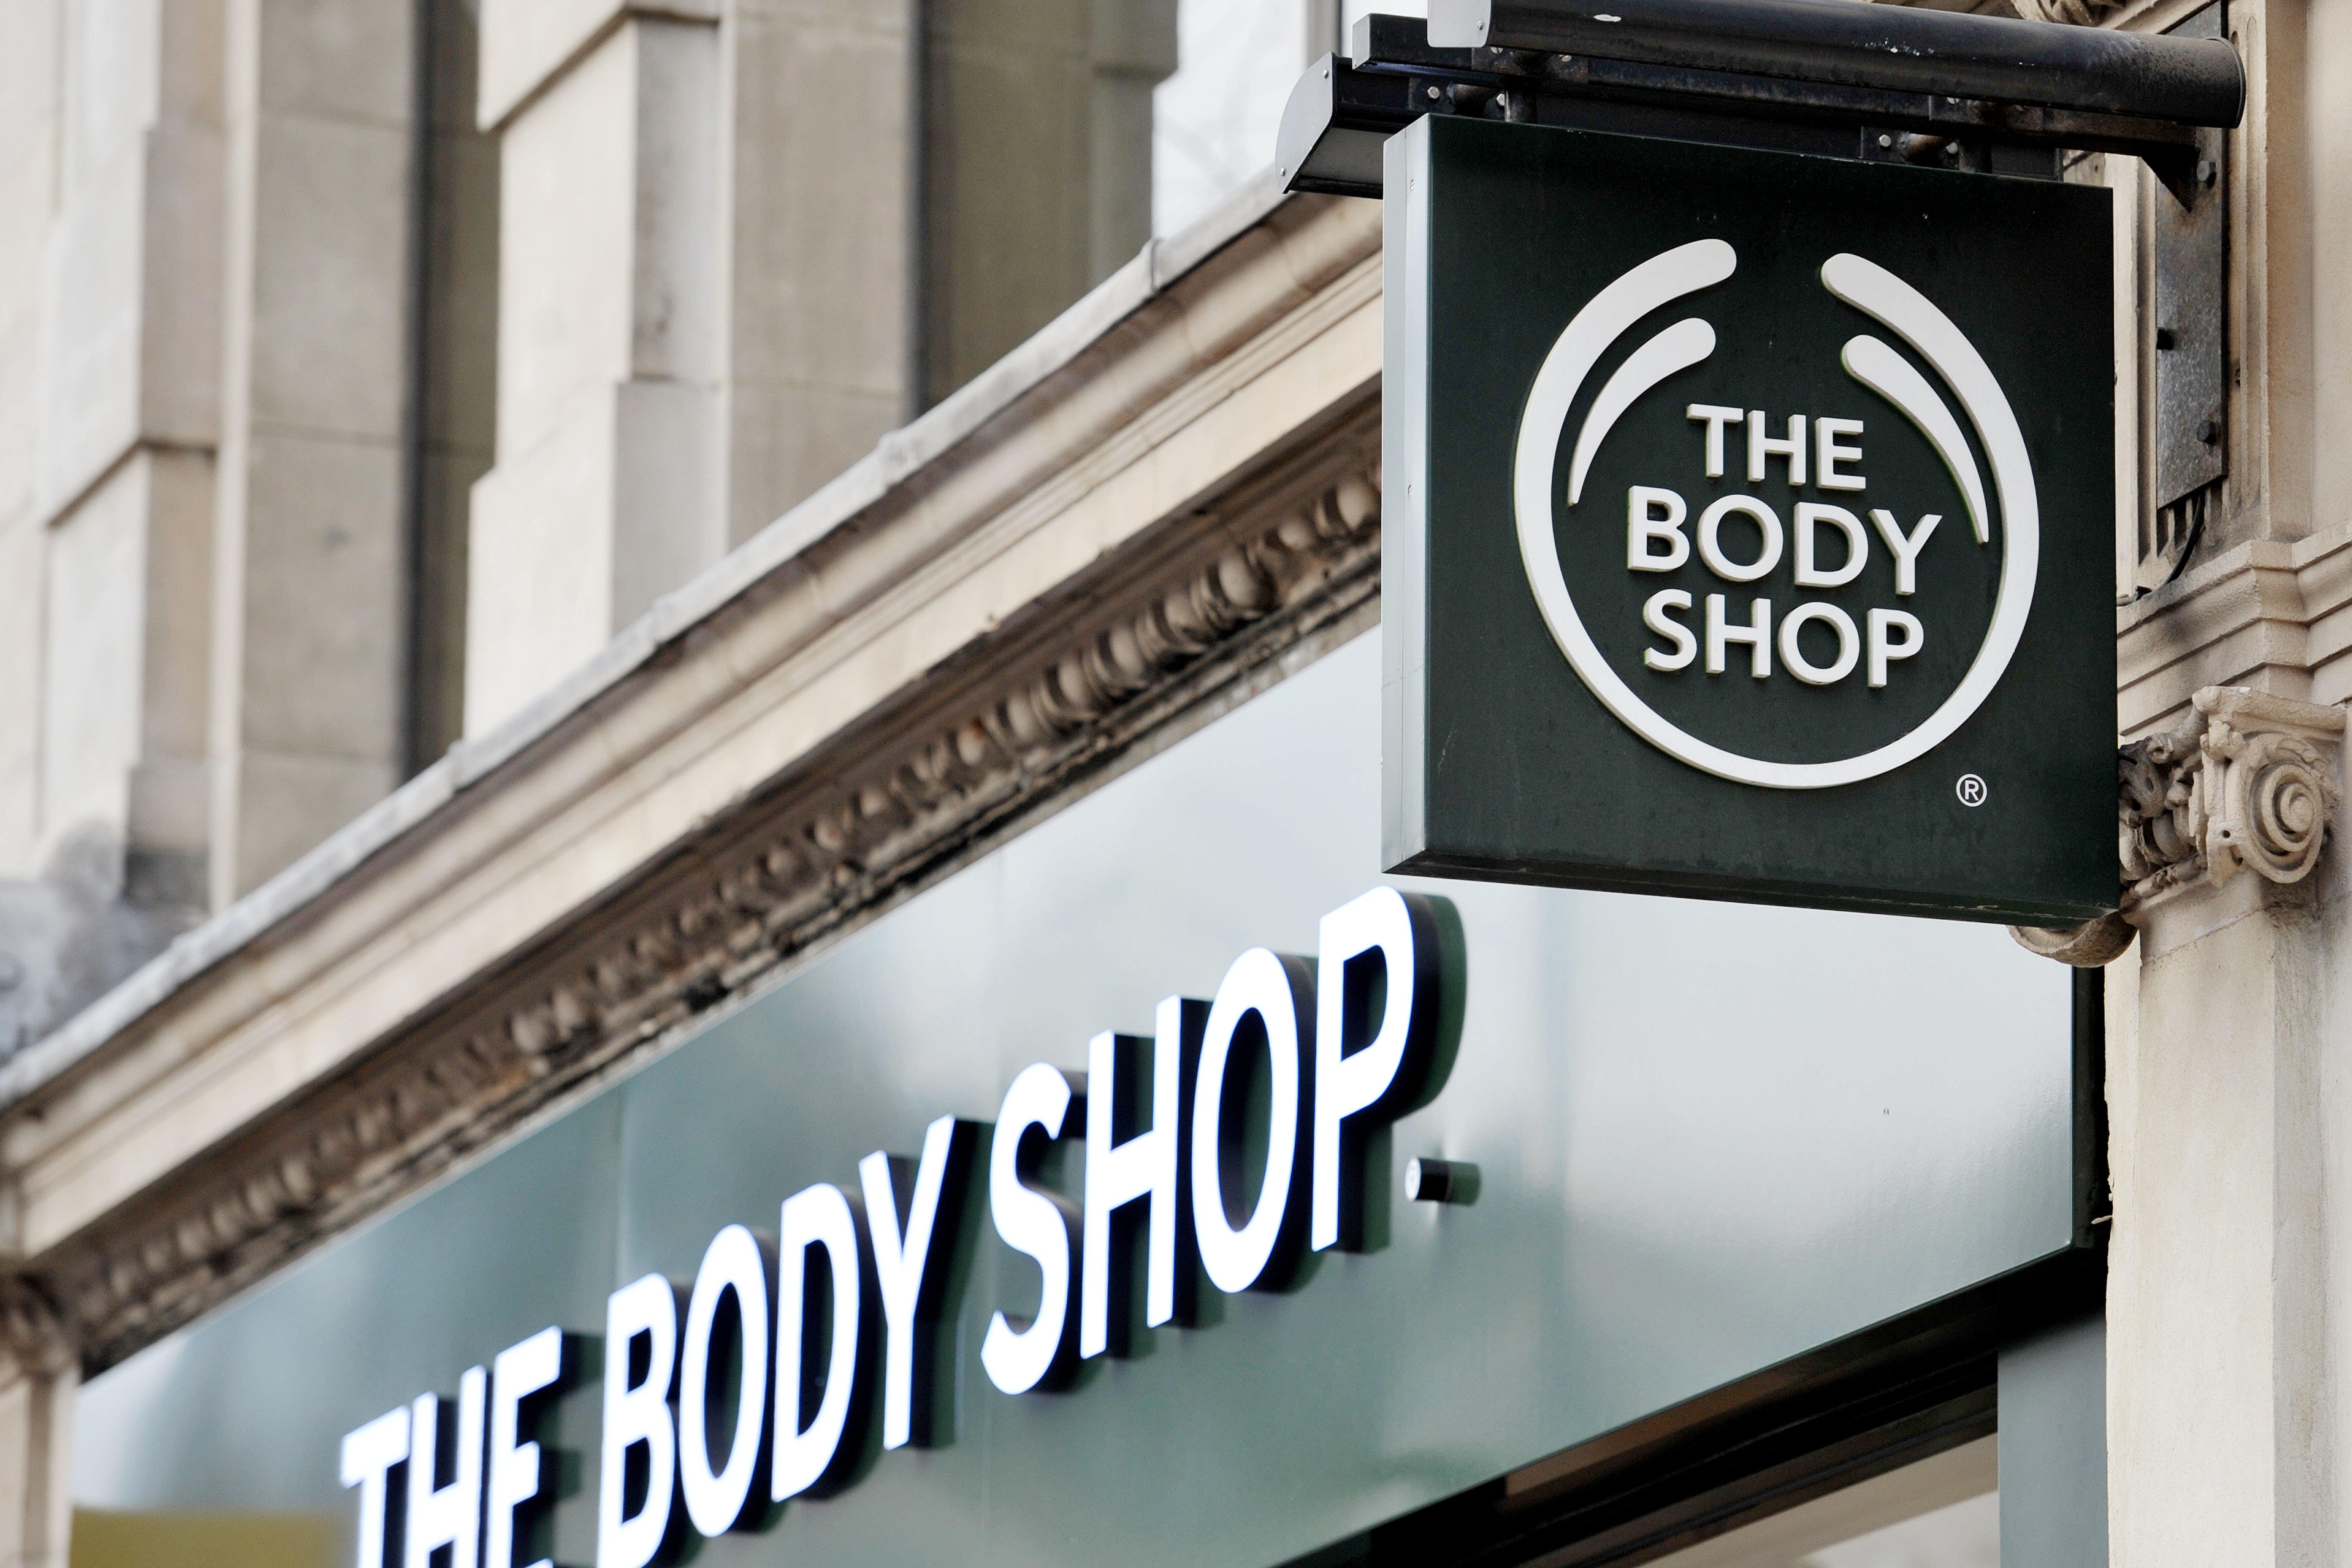 The Body Shop is struggling to make ends meet